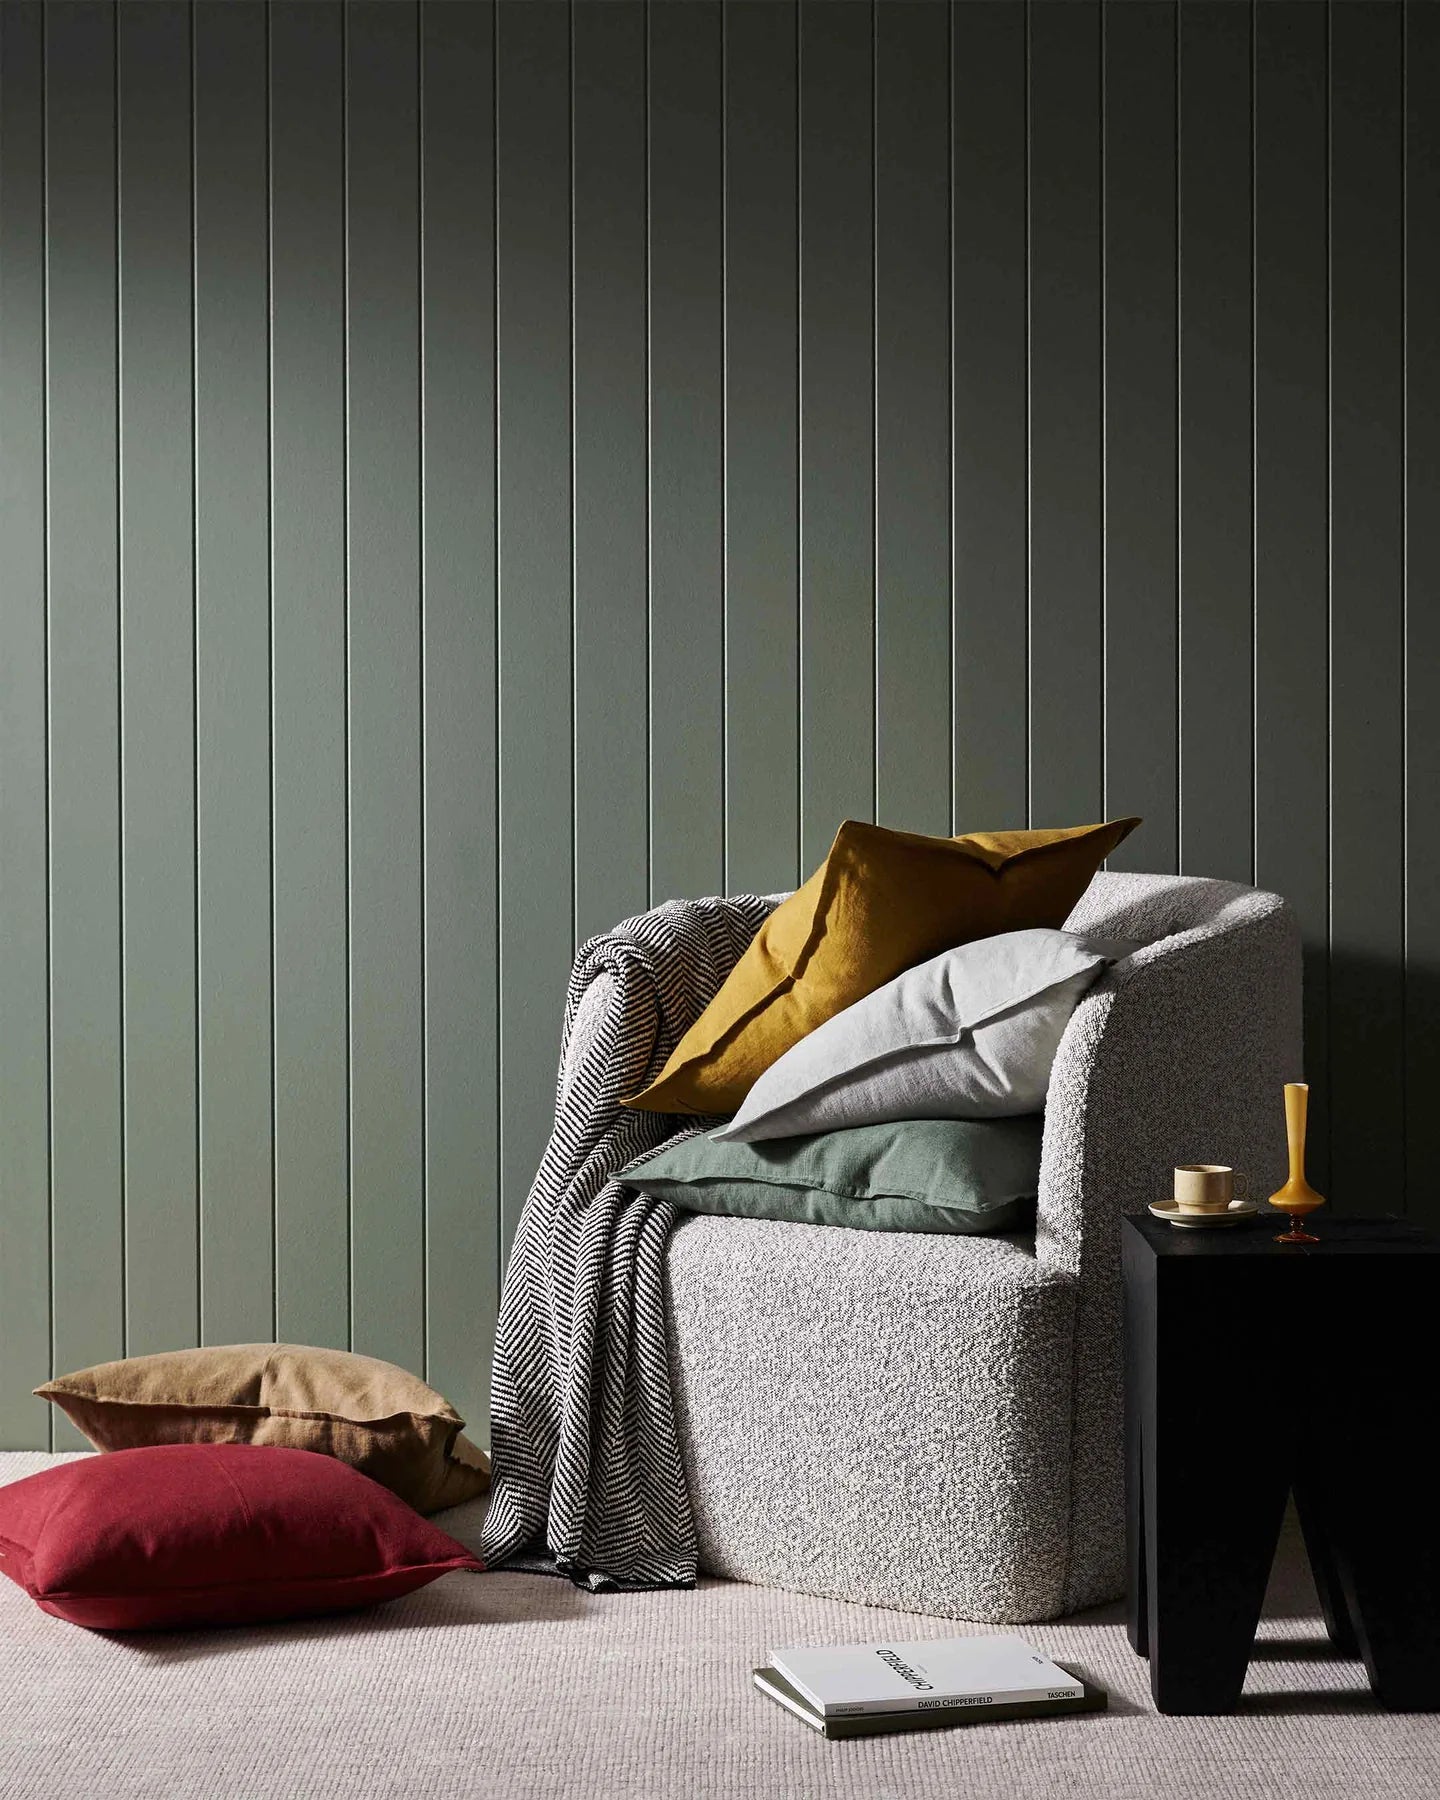 A reversible design with a bold chevron pattern - the comfort of Solano is unmistakable and can be enjoyed in a range of on-trend colours.